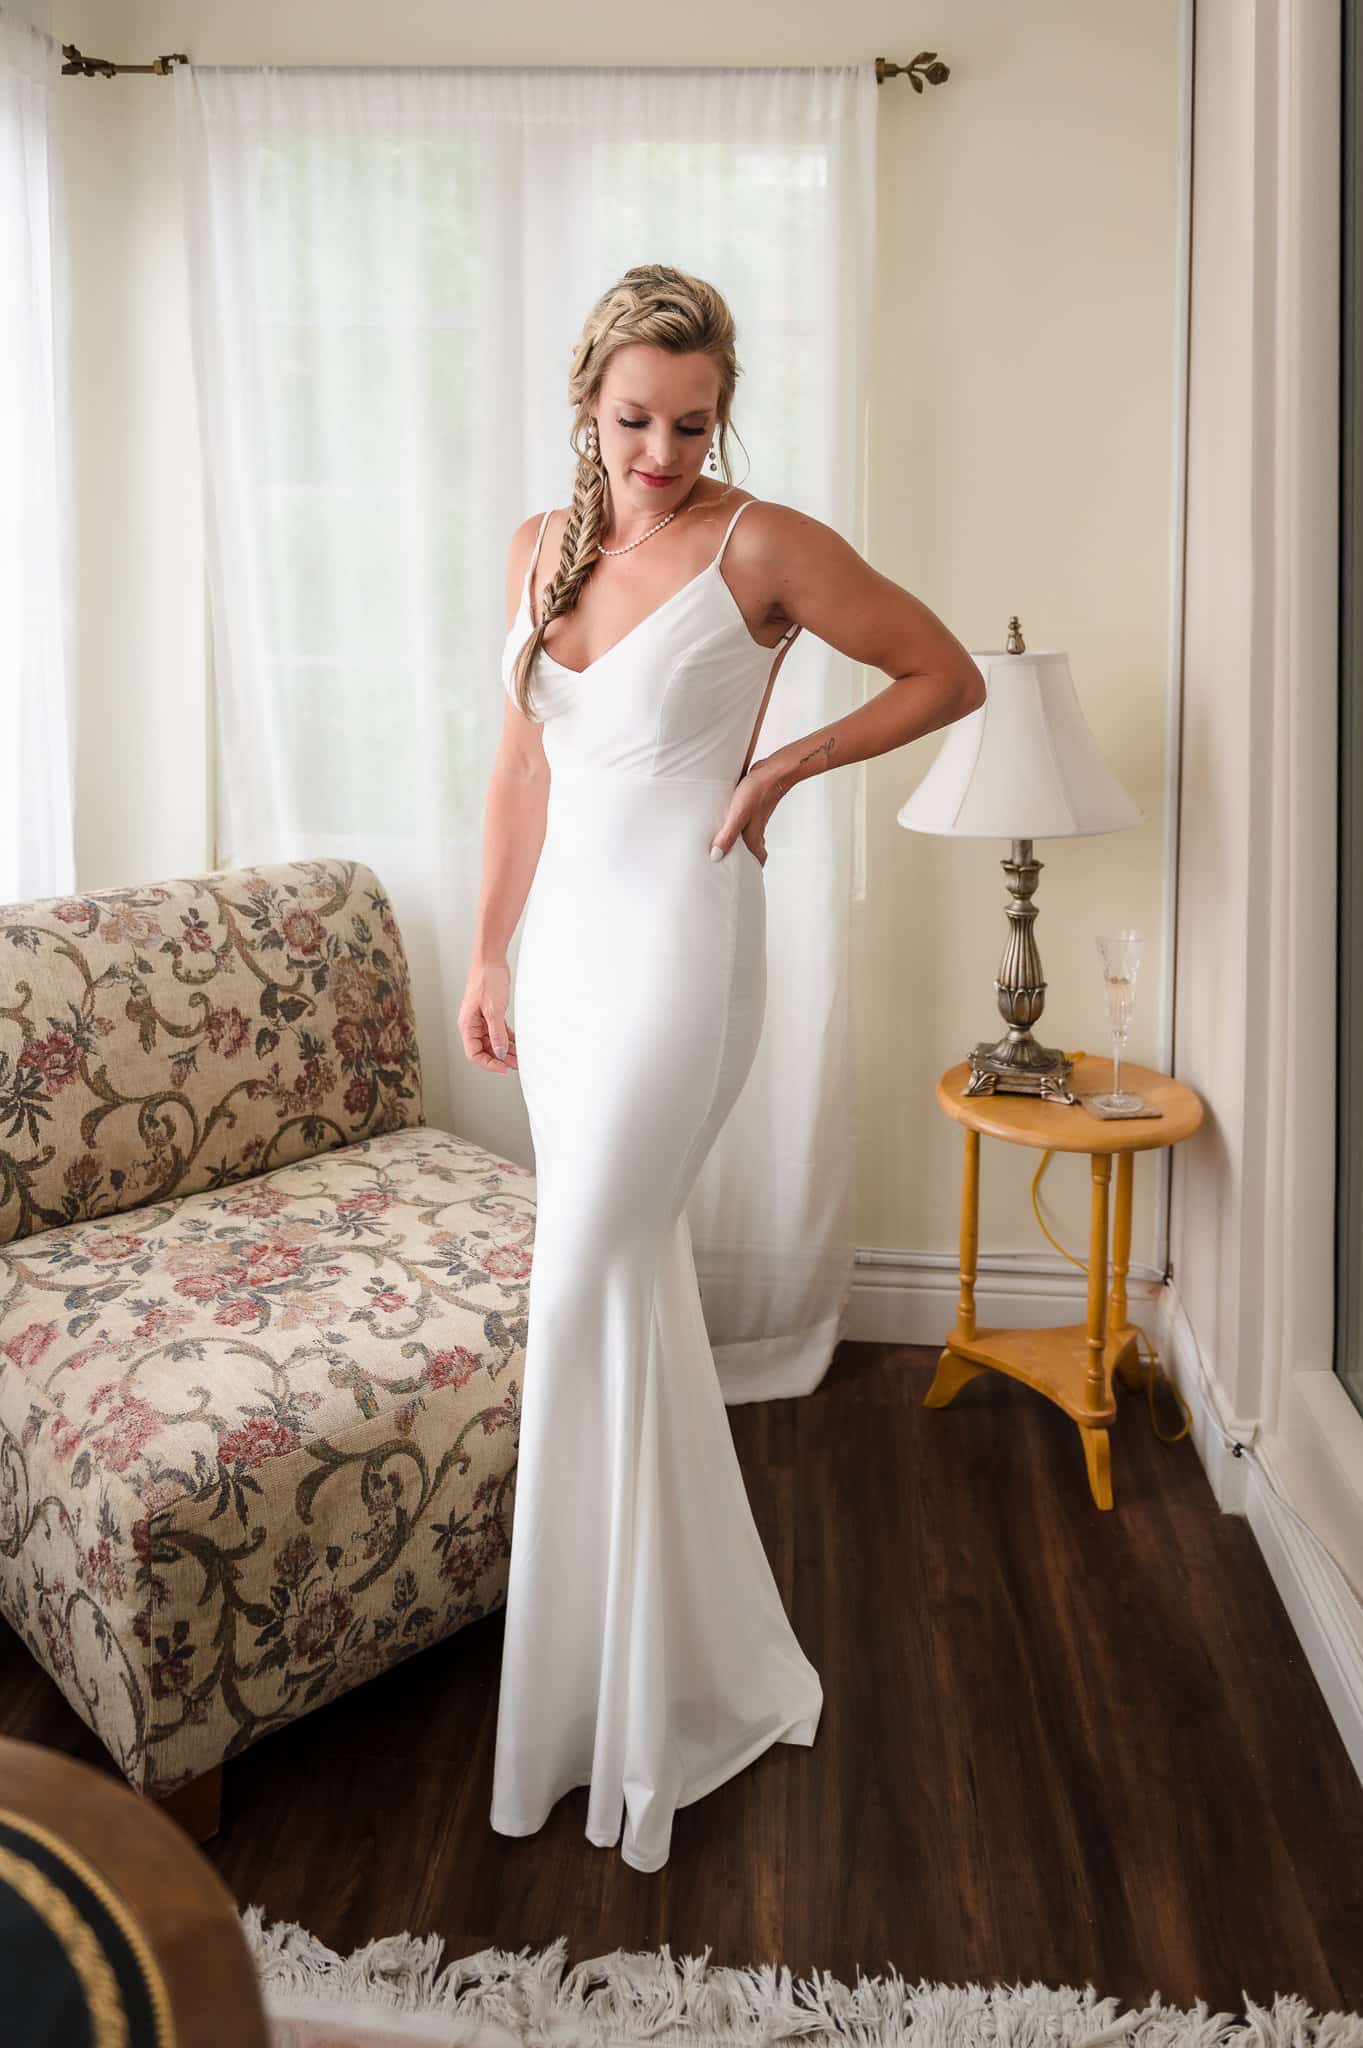 A bride shows of her beautiful figure in a white wedding dress as she readies for her 10-year vow renewal.